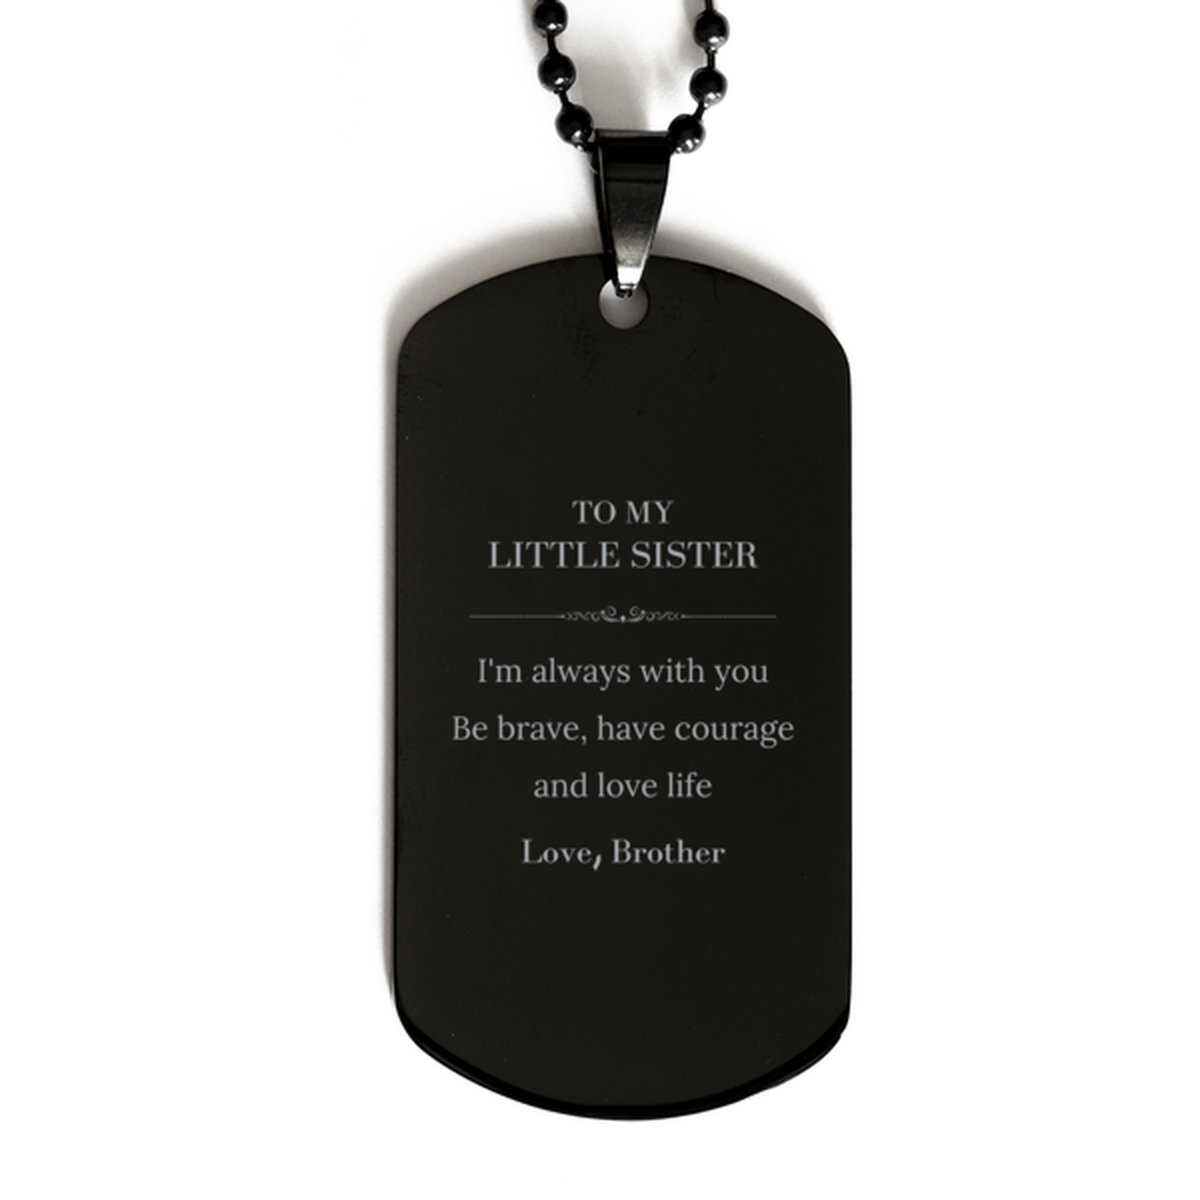 To My Little Sister Gifts from Brother, Unique Black Dog Tag Inspirational Christmas Birthday Graduation Gifts for Little Sister I'm always with you. Be brave, have courage and love life. Love, Brother